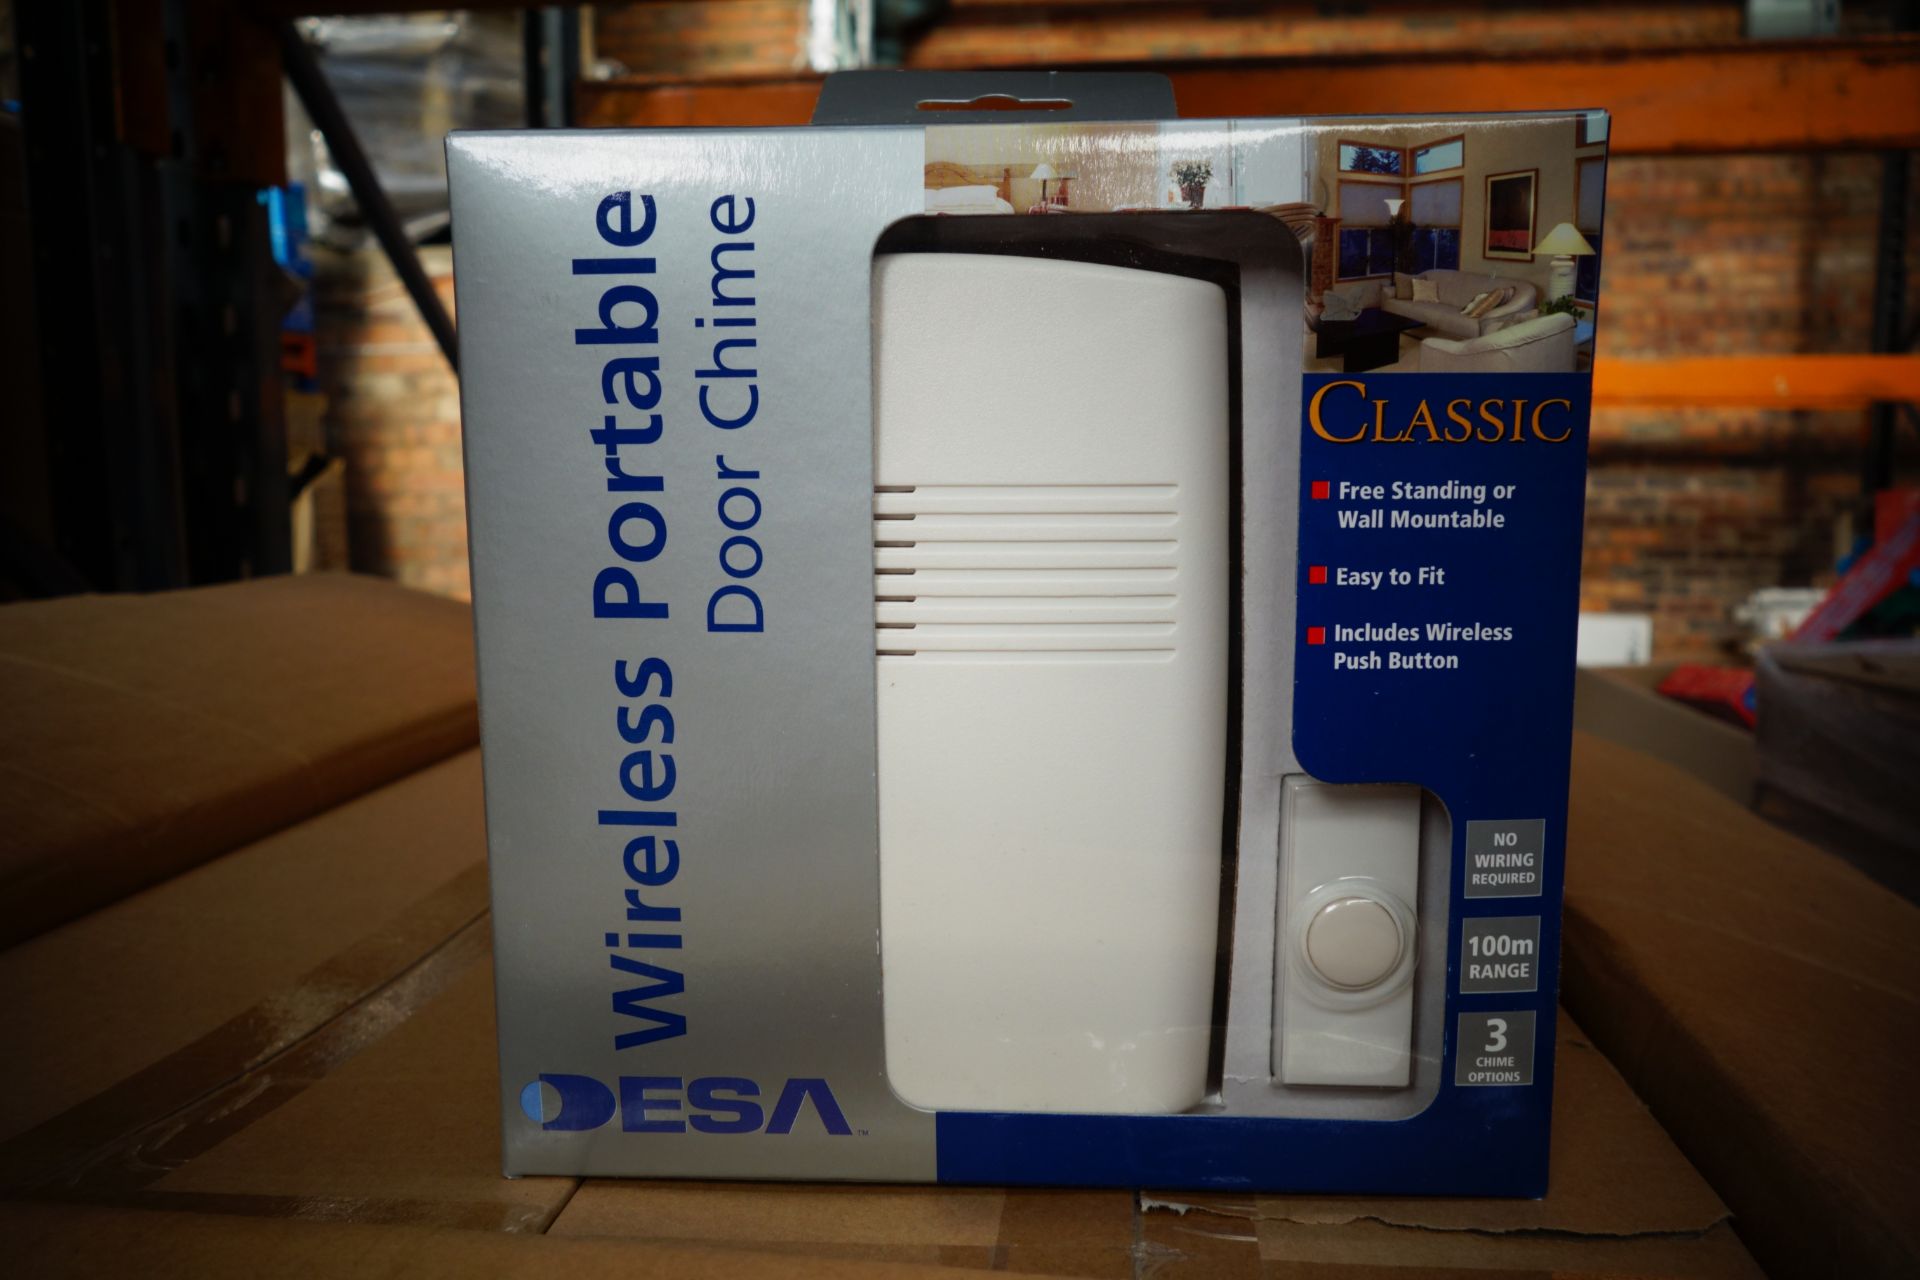 24 x New Desa Wireless Wall Mountable 100M Range Door Chimes. RRP £39.99 each, giving this lot a